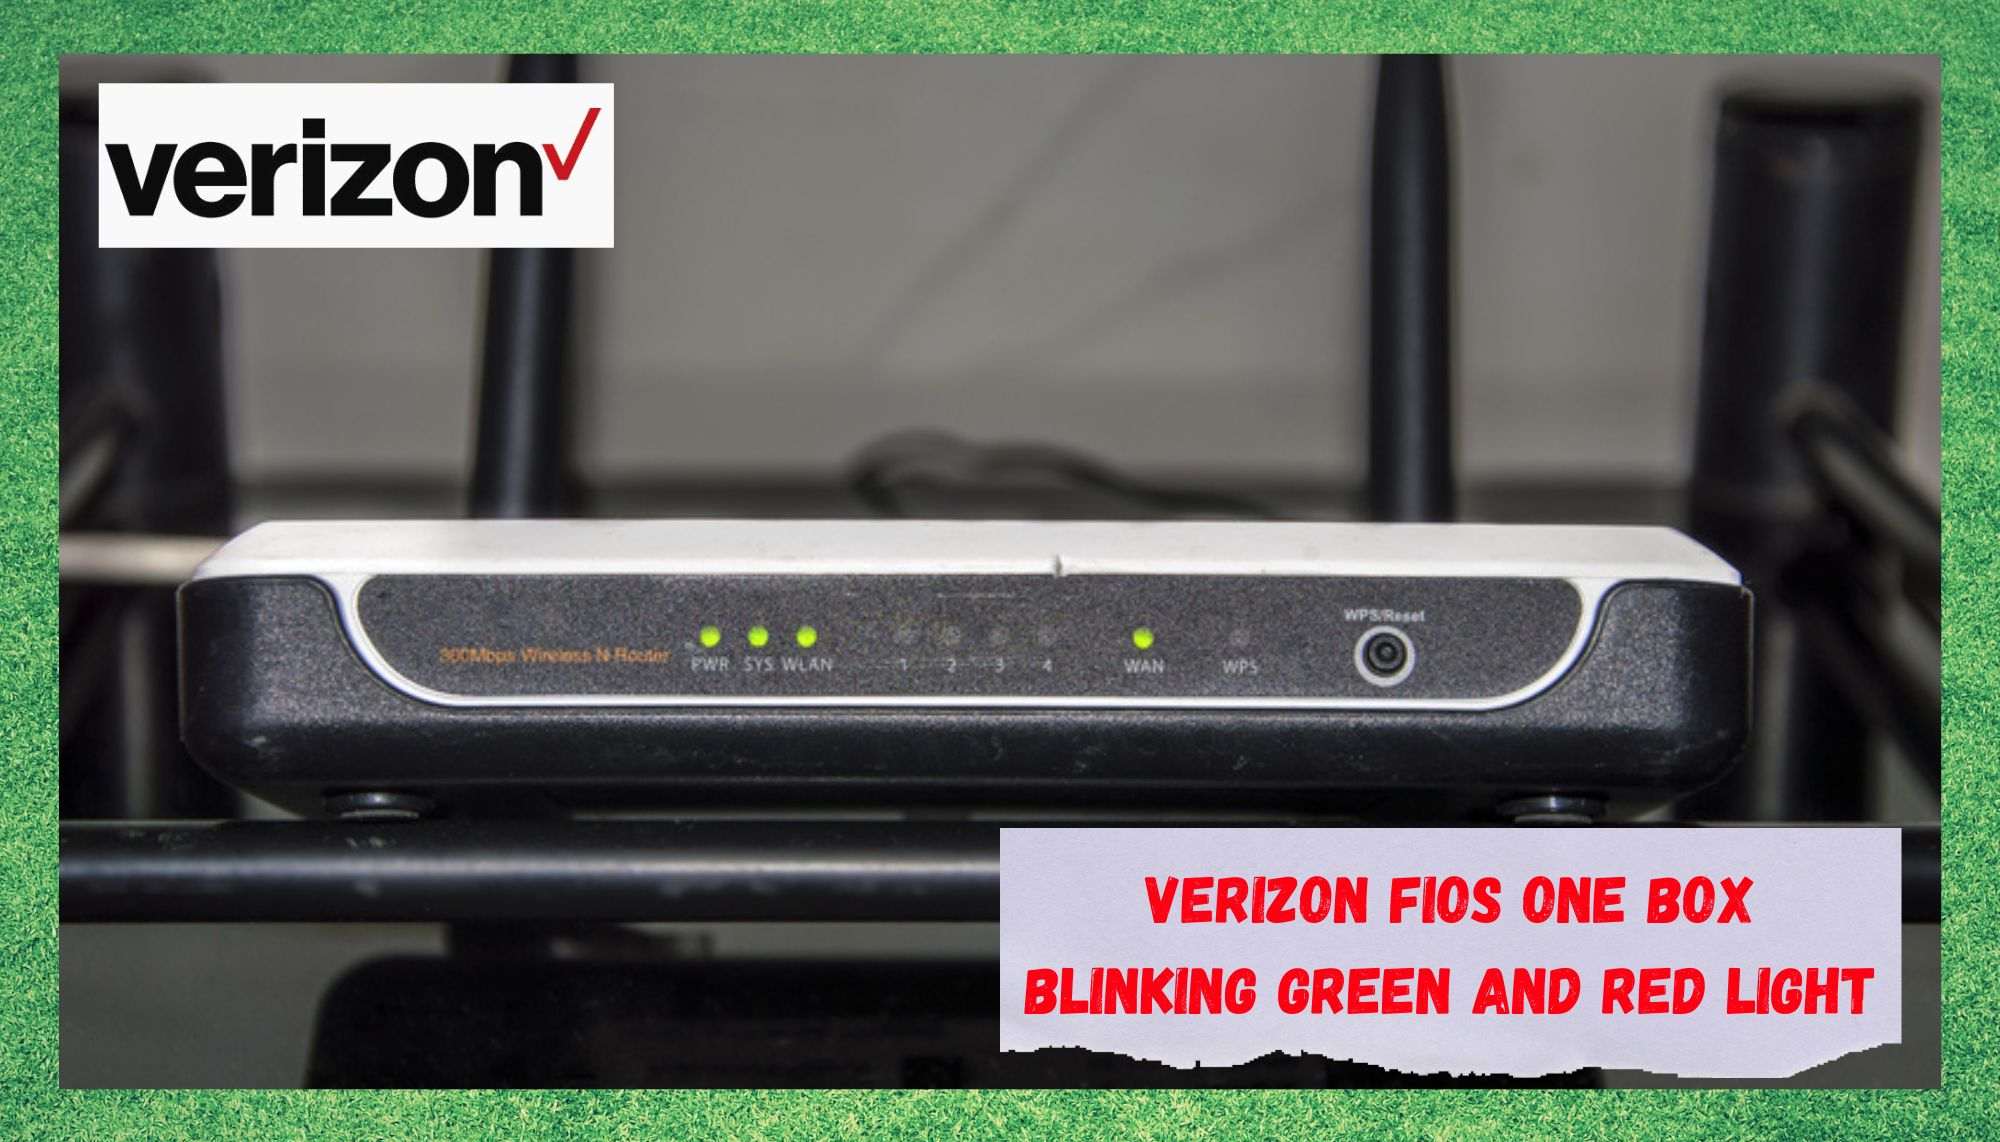 verizon fios one box blinking green and red light